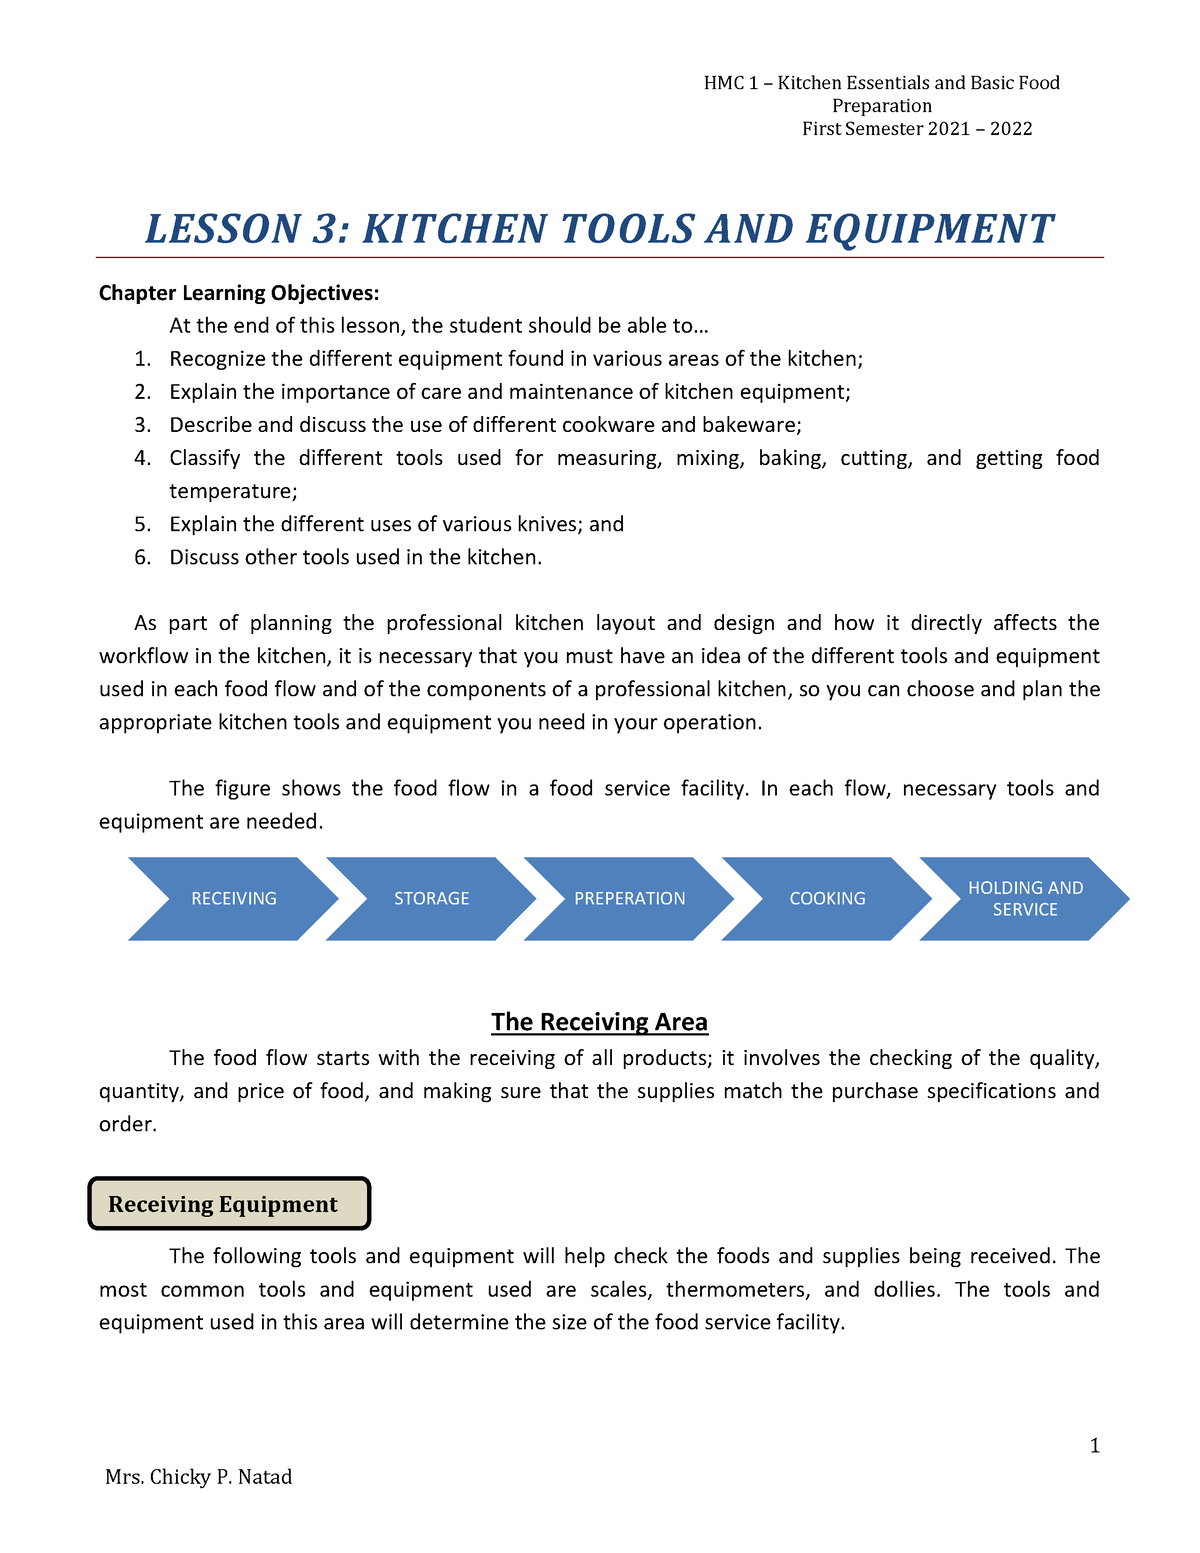 Lesson 3- Kitchen Tools and Equipment - Preparation First Semester 2021 ...